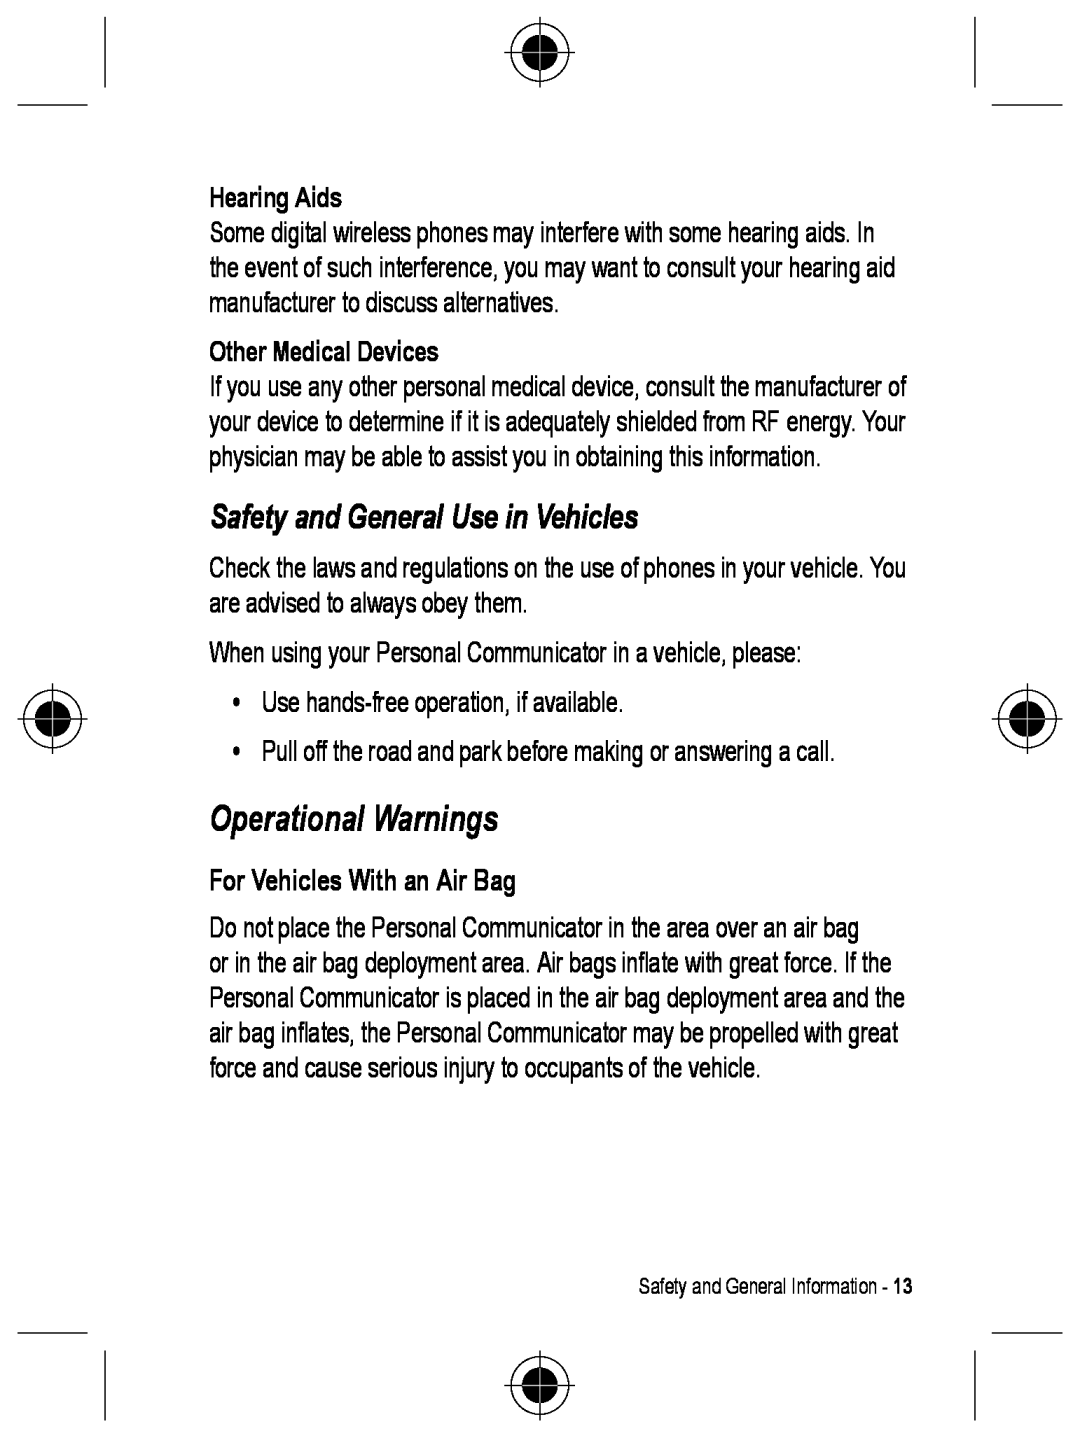 Motorola C330 manual Operational Warnings, Safety and General Use in Vehicles, For Vehicles With an Air Bag 